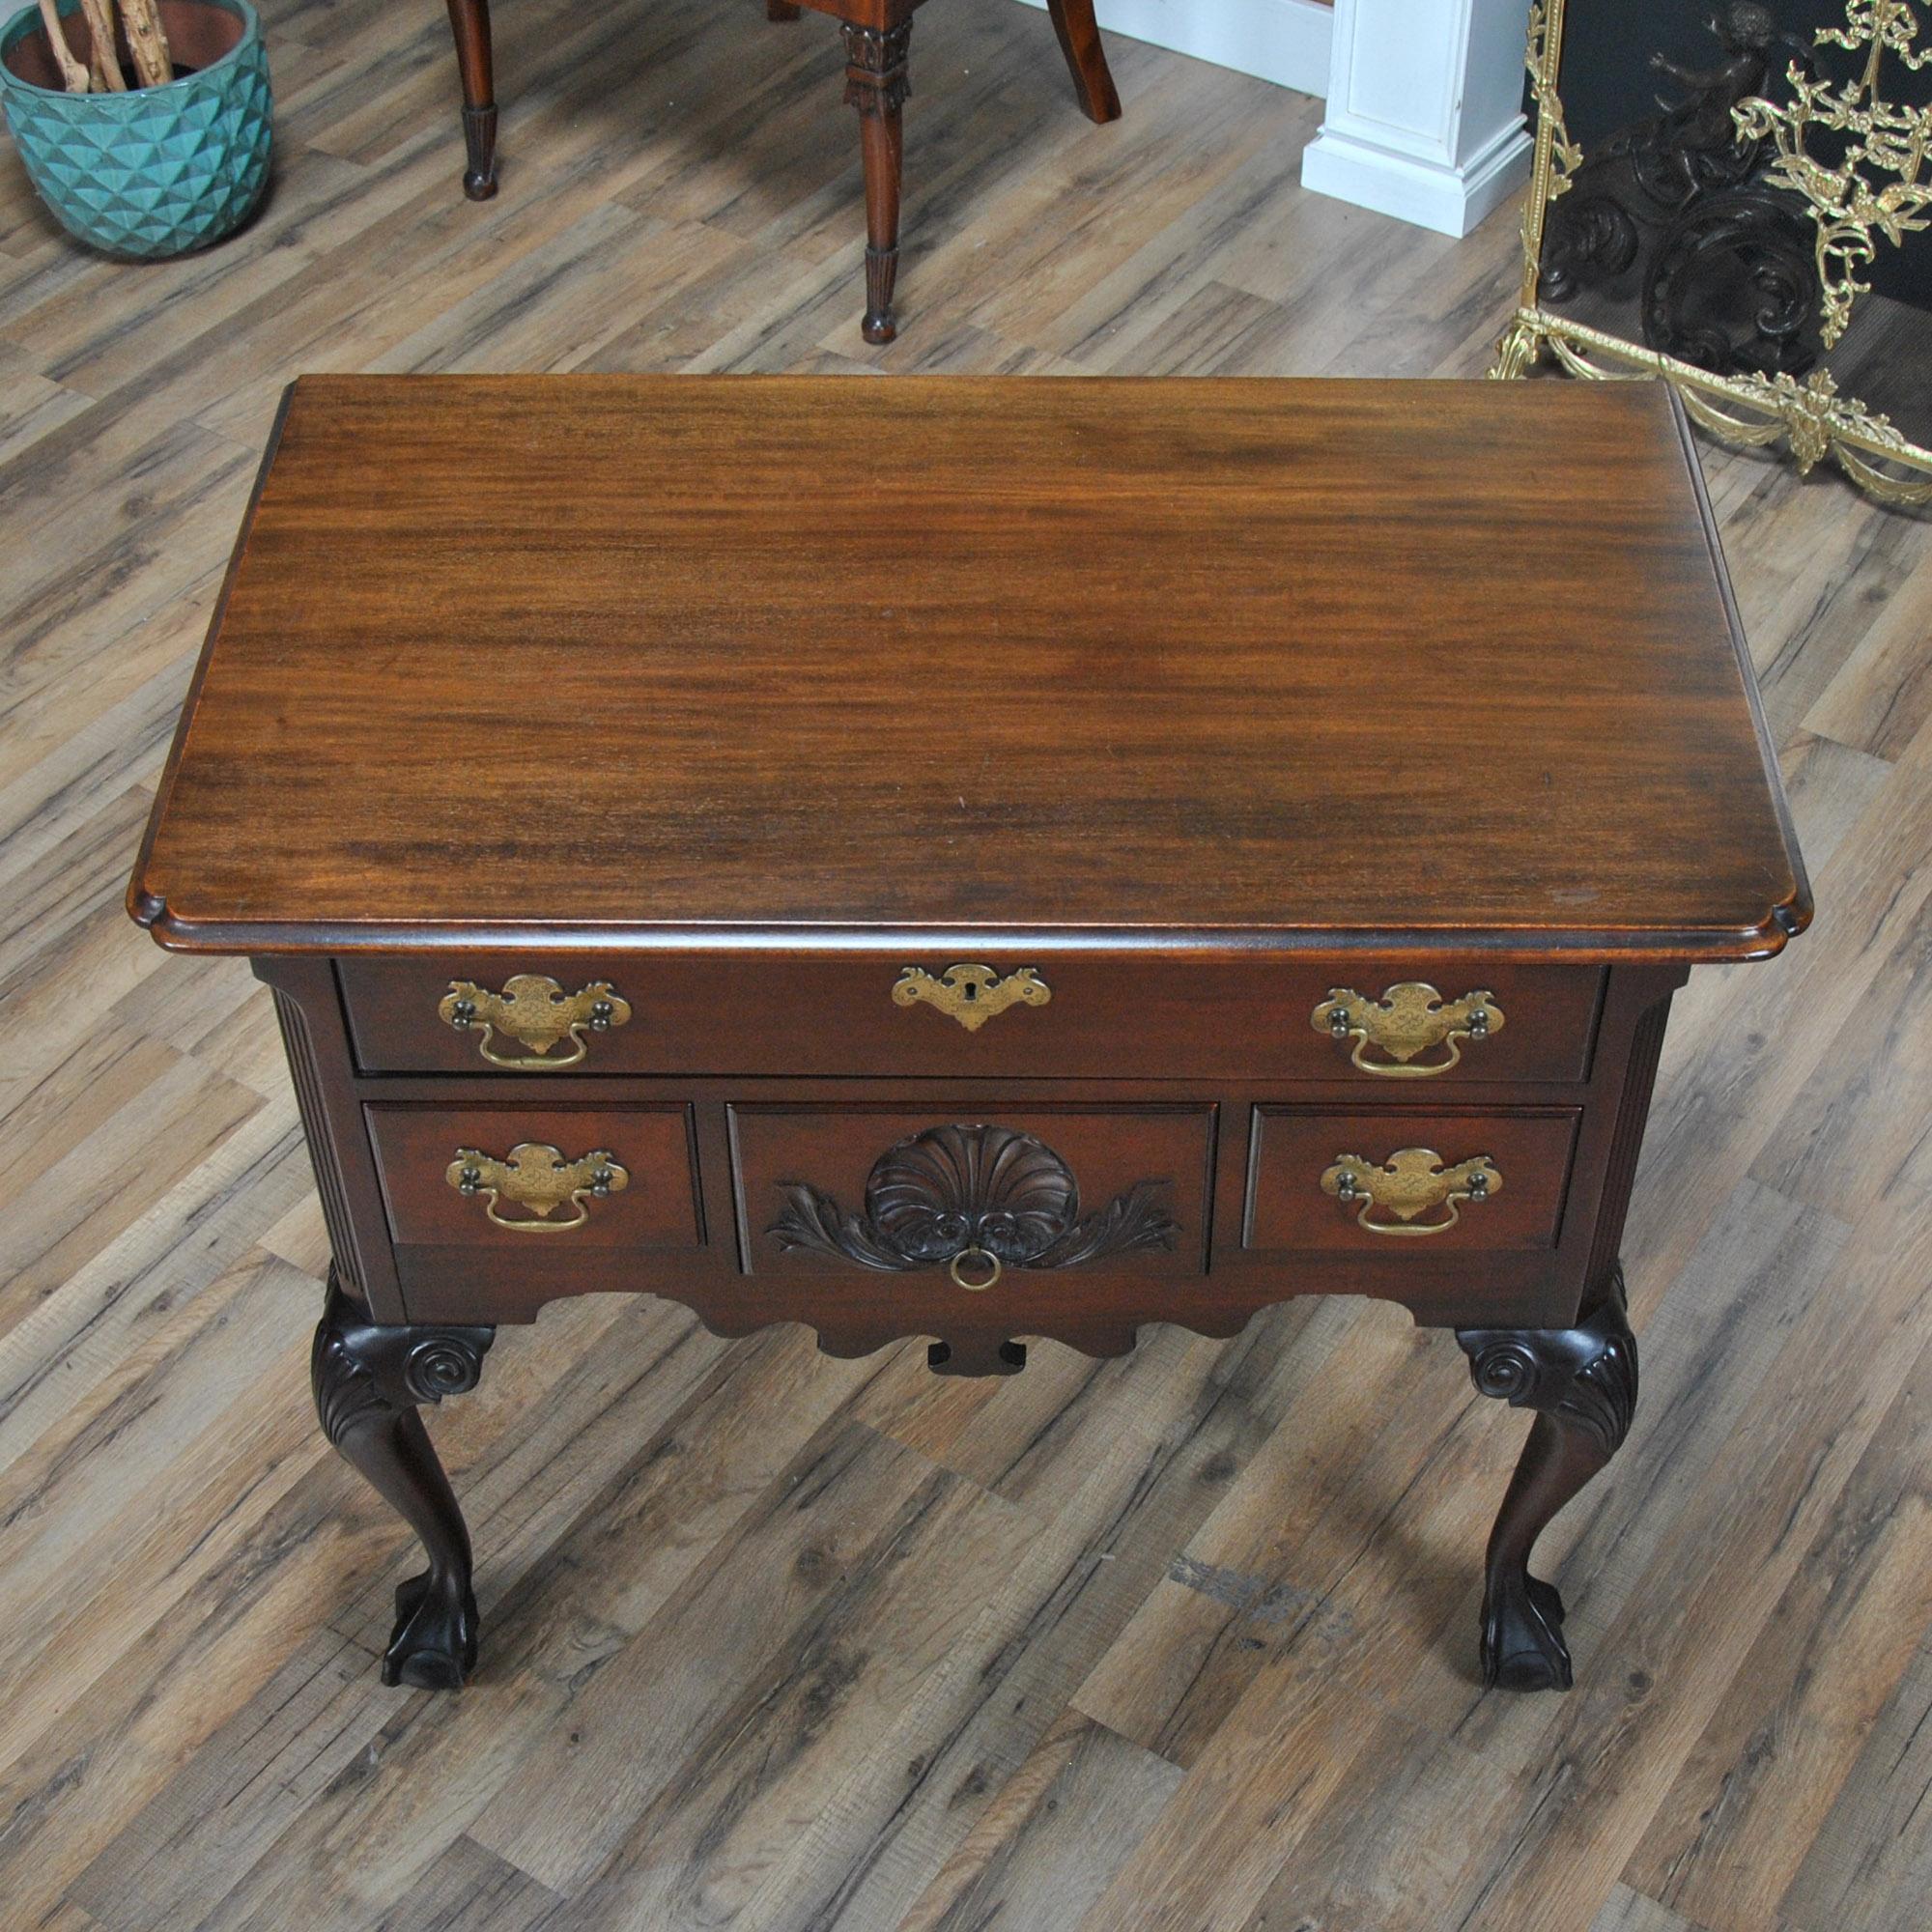 A vintage mahogany Paine chippendale lowboy dresser. This classically shaped chest features four drawers which are each beautifully shaped and carved to work together creating both a functional and attractive overall appearance. Based upon designs